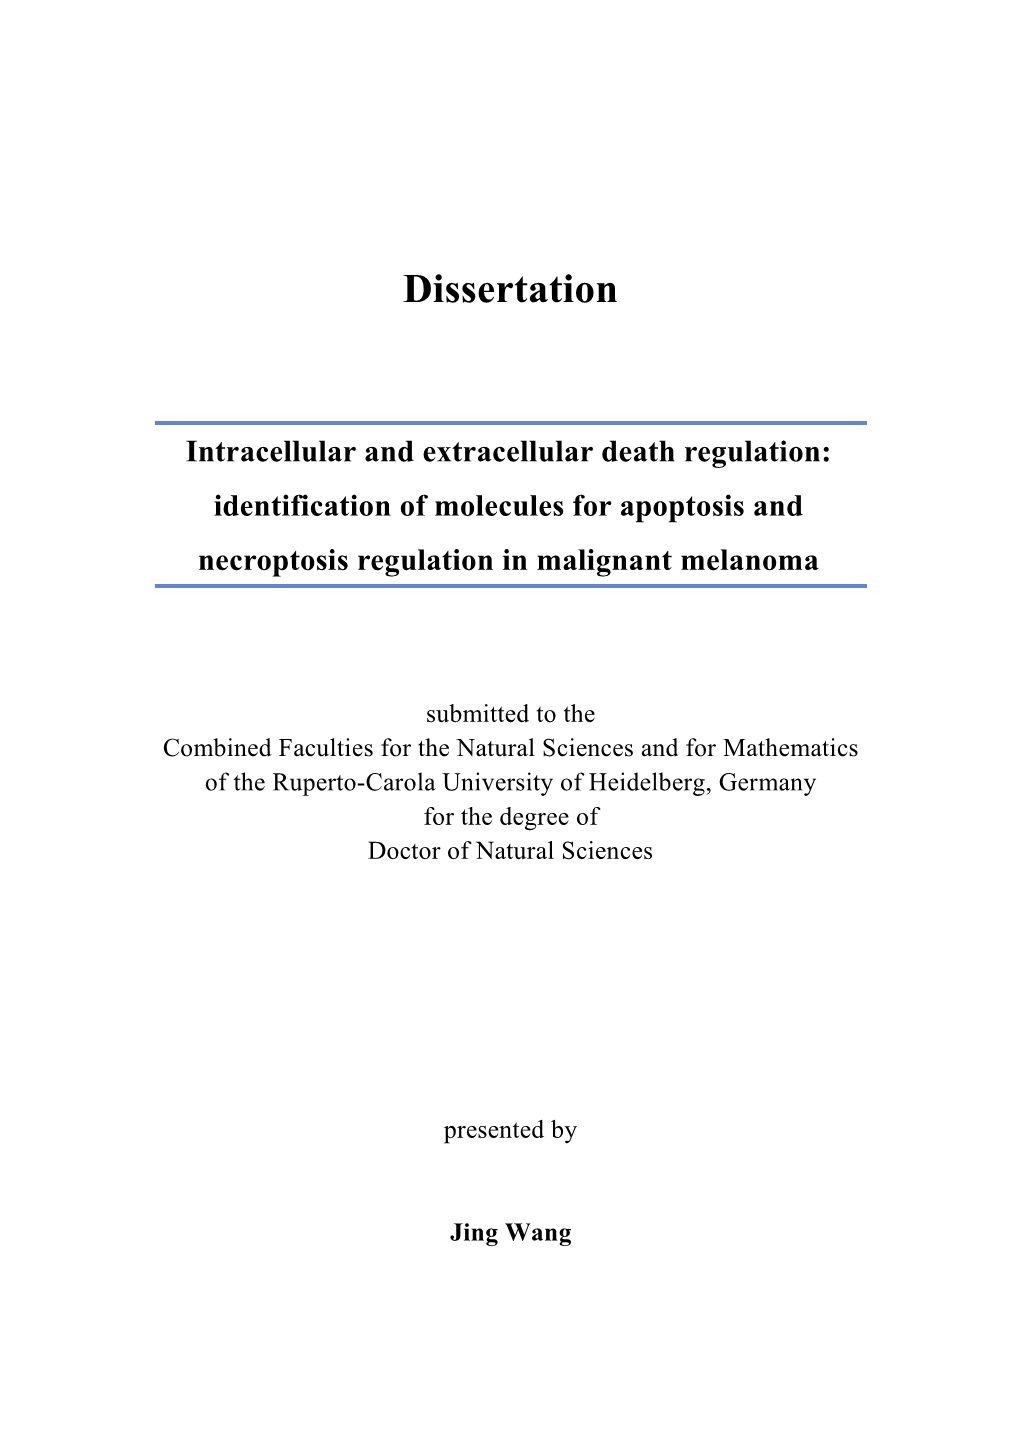 Phd Thesis Jing with Cover